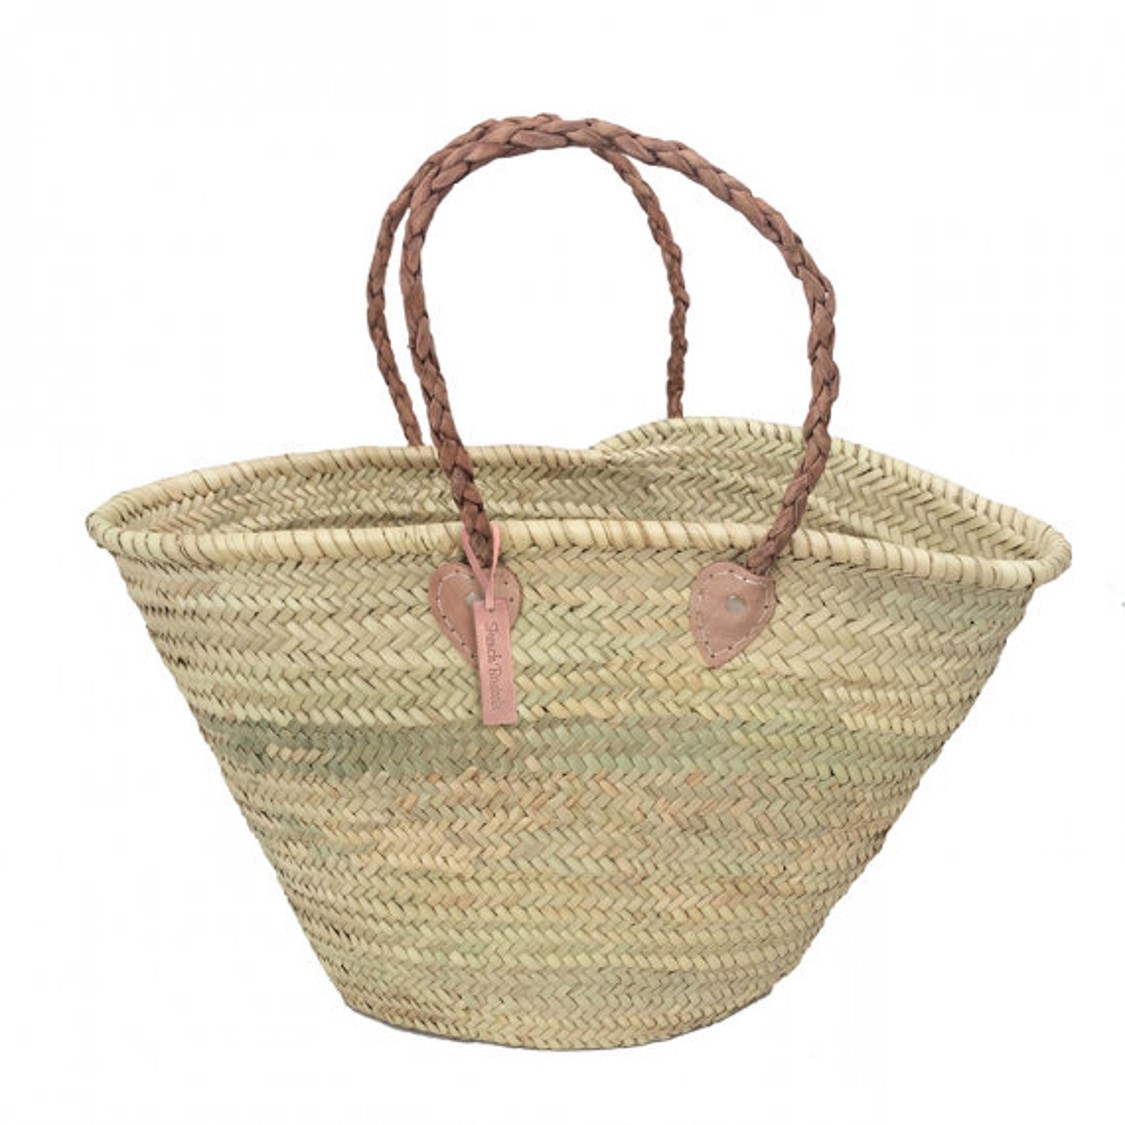 Find Your Perfect Provencal (or Simply French) Market Tote – The